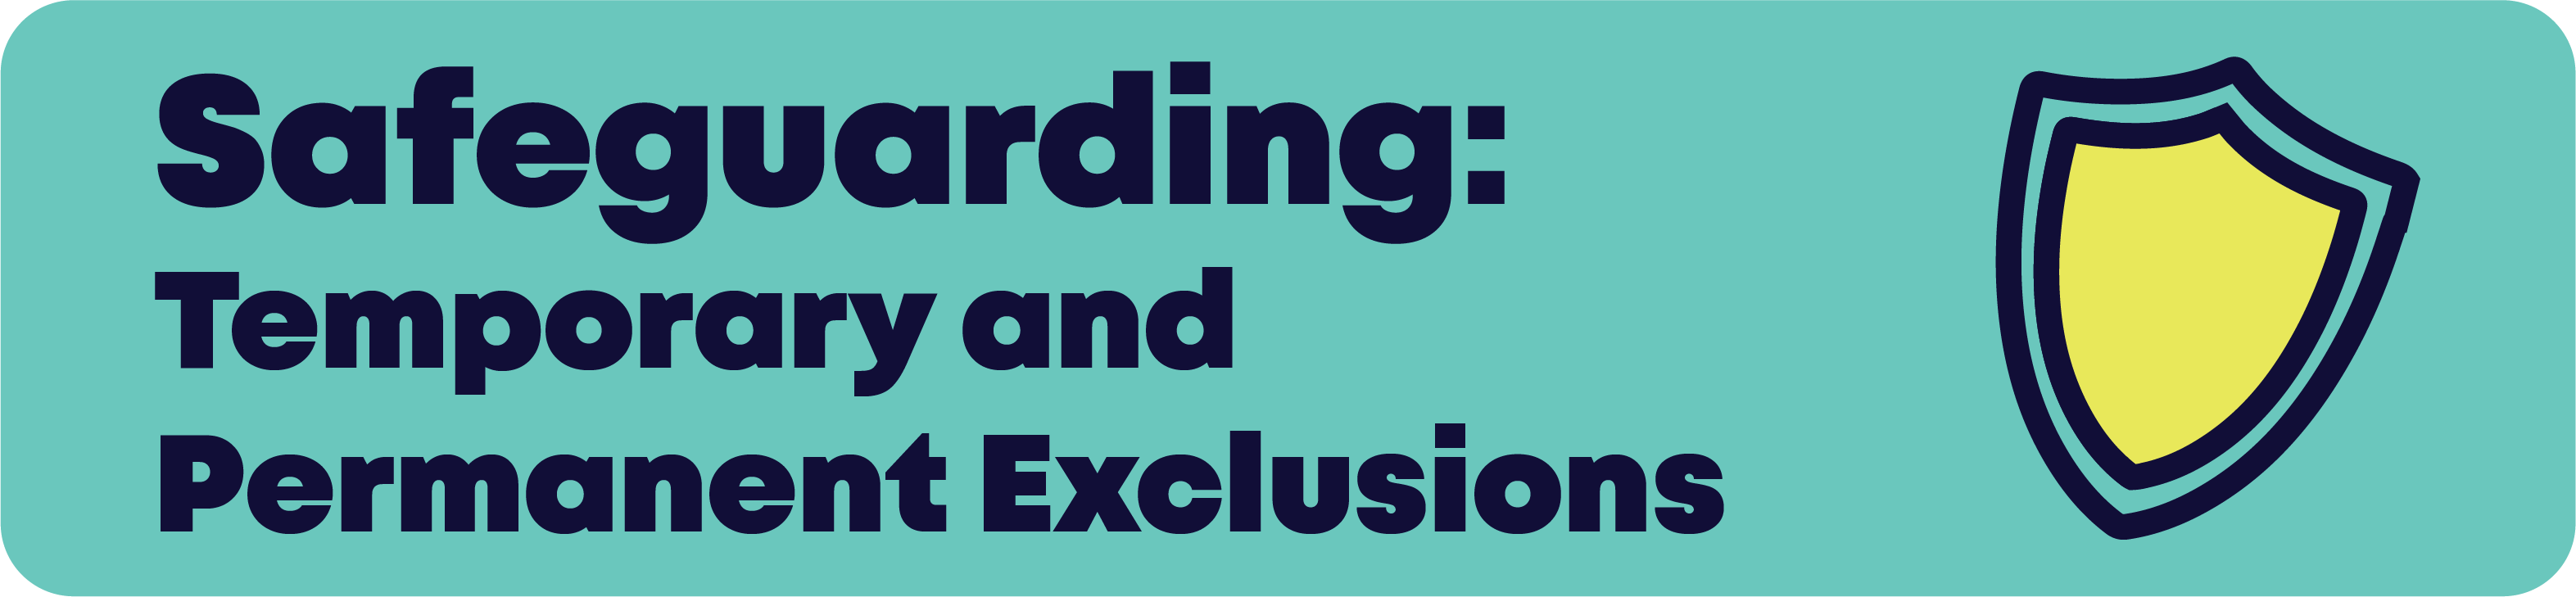 safeguarding: temporary and permanent exclusions